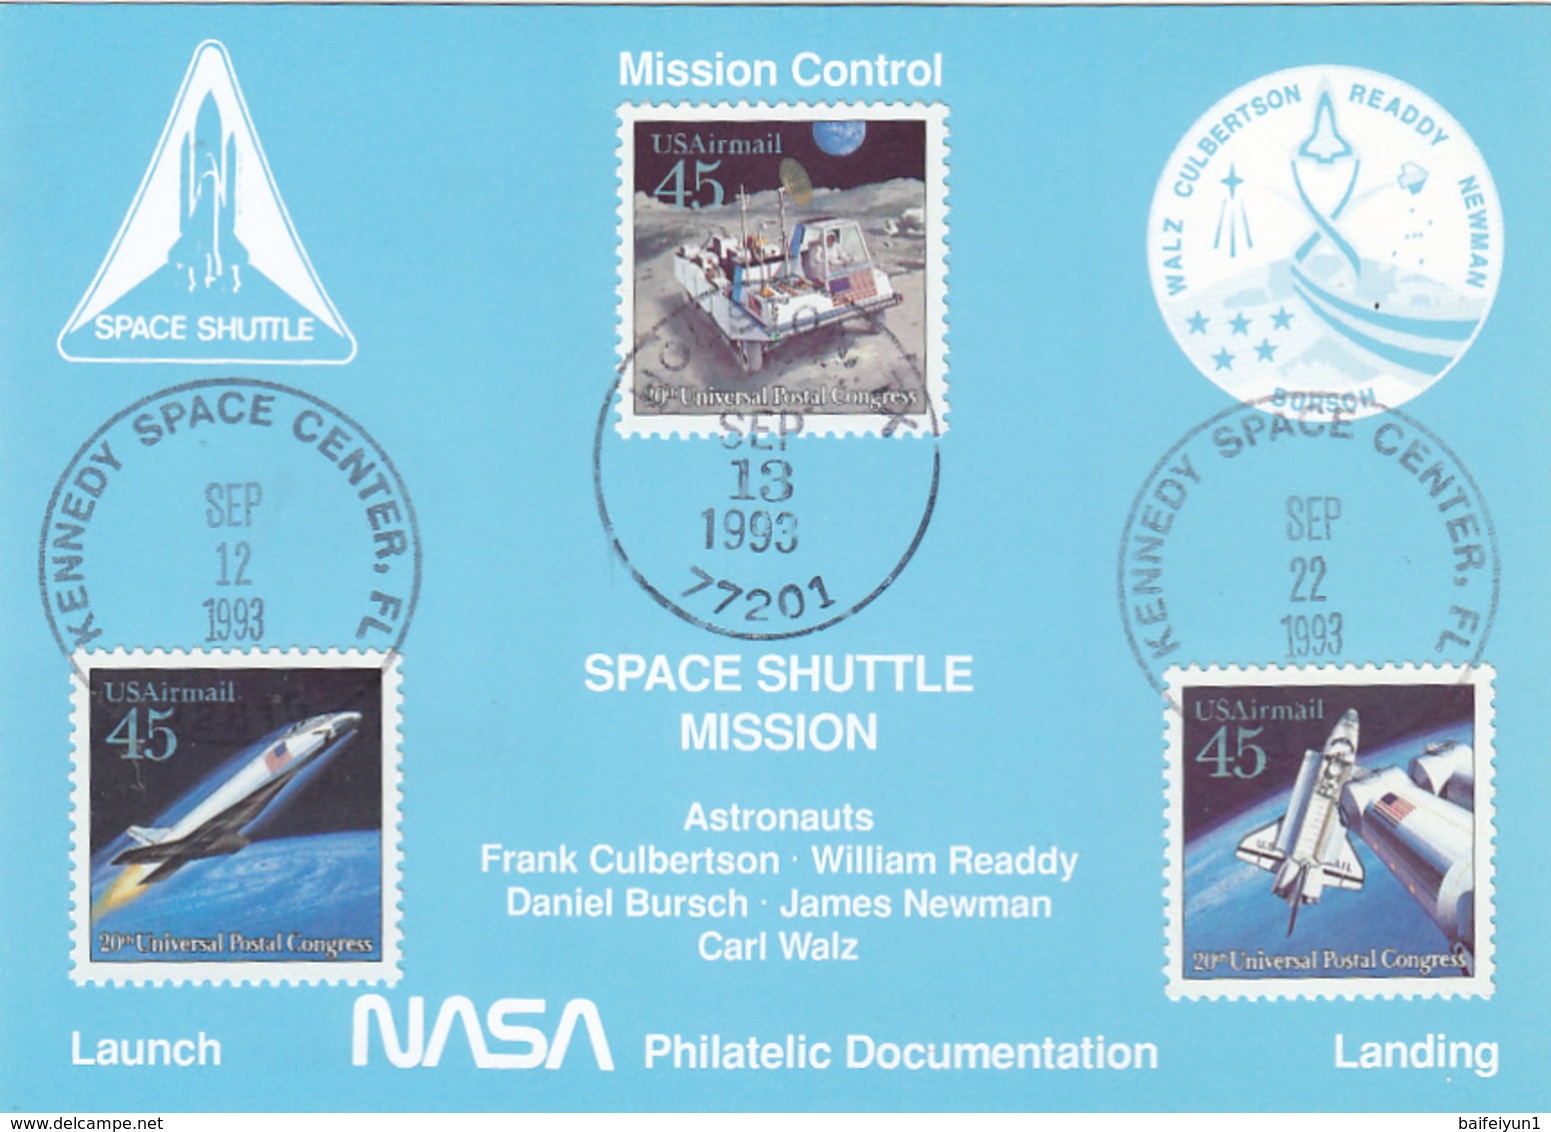 1993 USA Space Shuttle Discovery STS-51 Postal Card - North  America